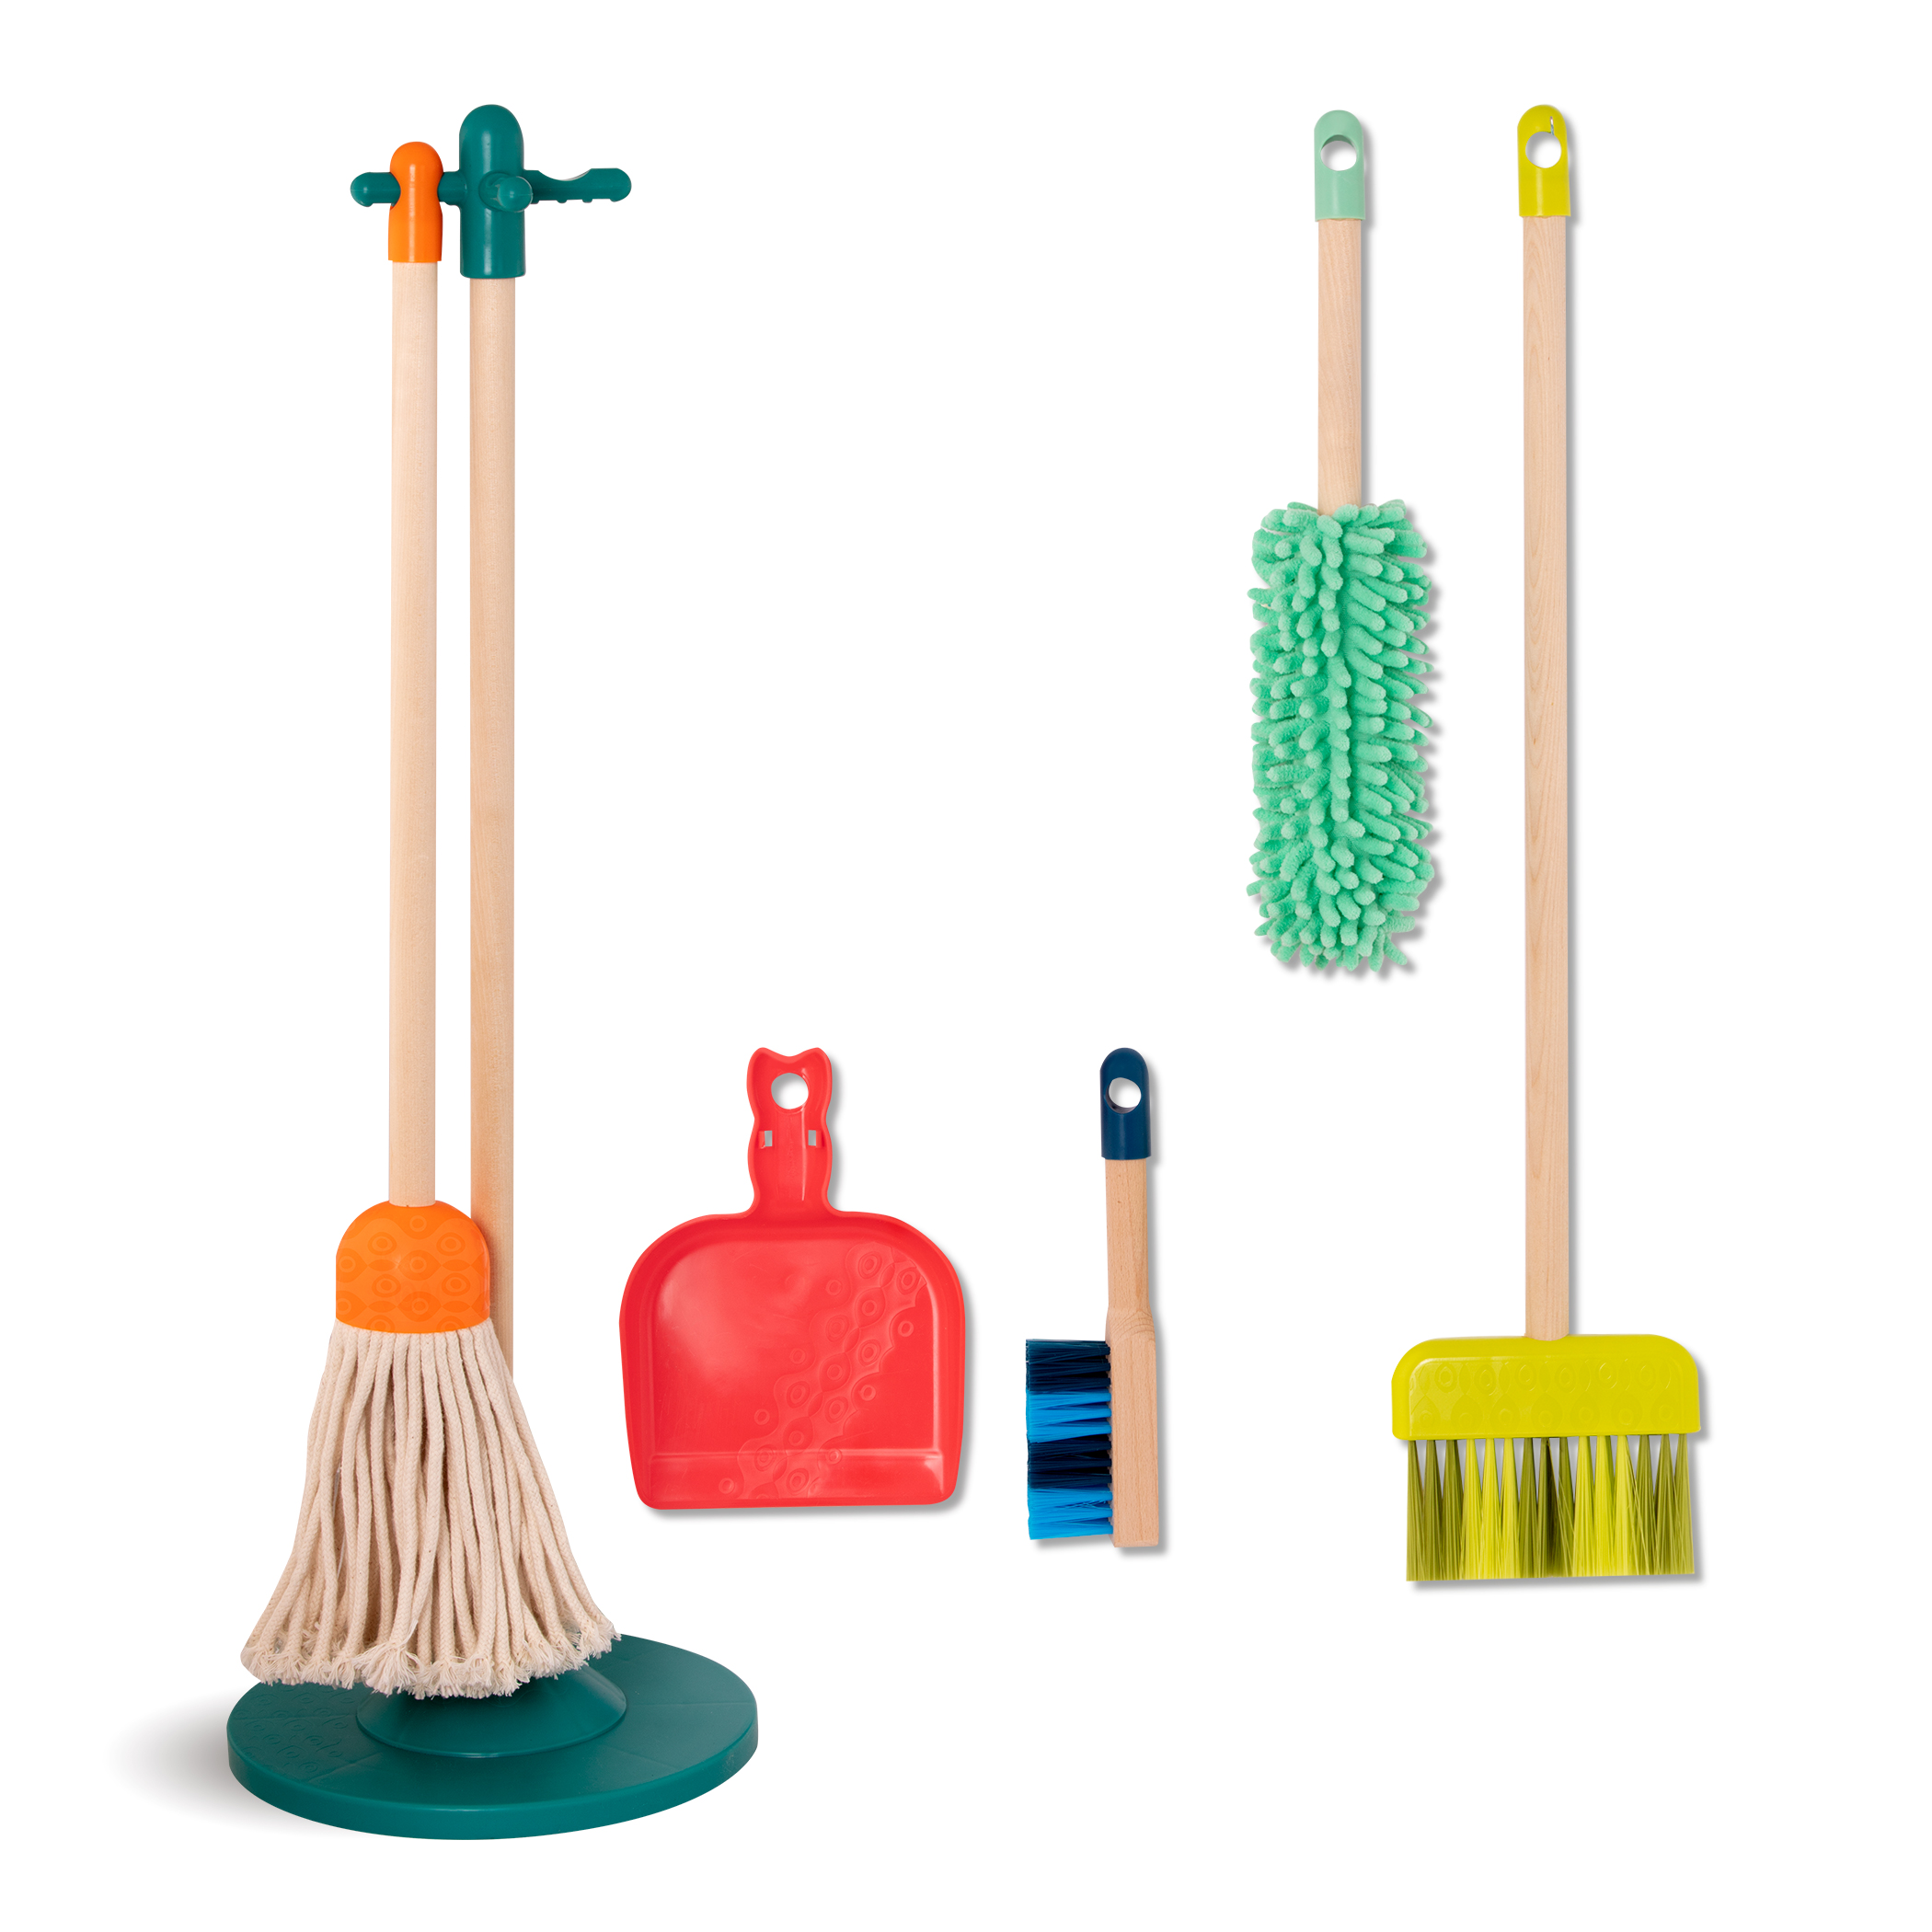 Clean 'n' Play, Wooden Cleaning Toys